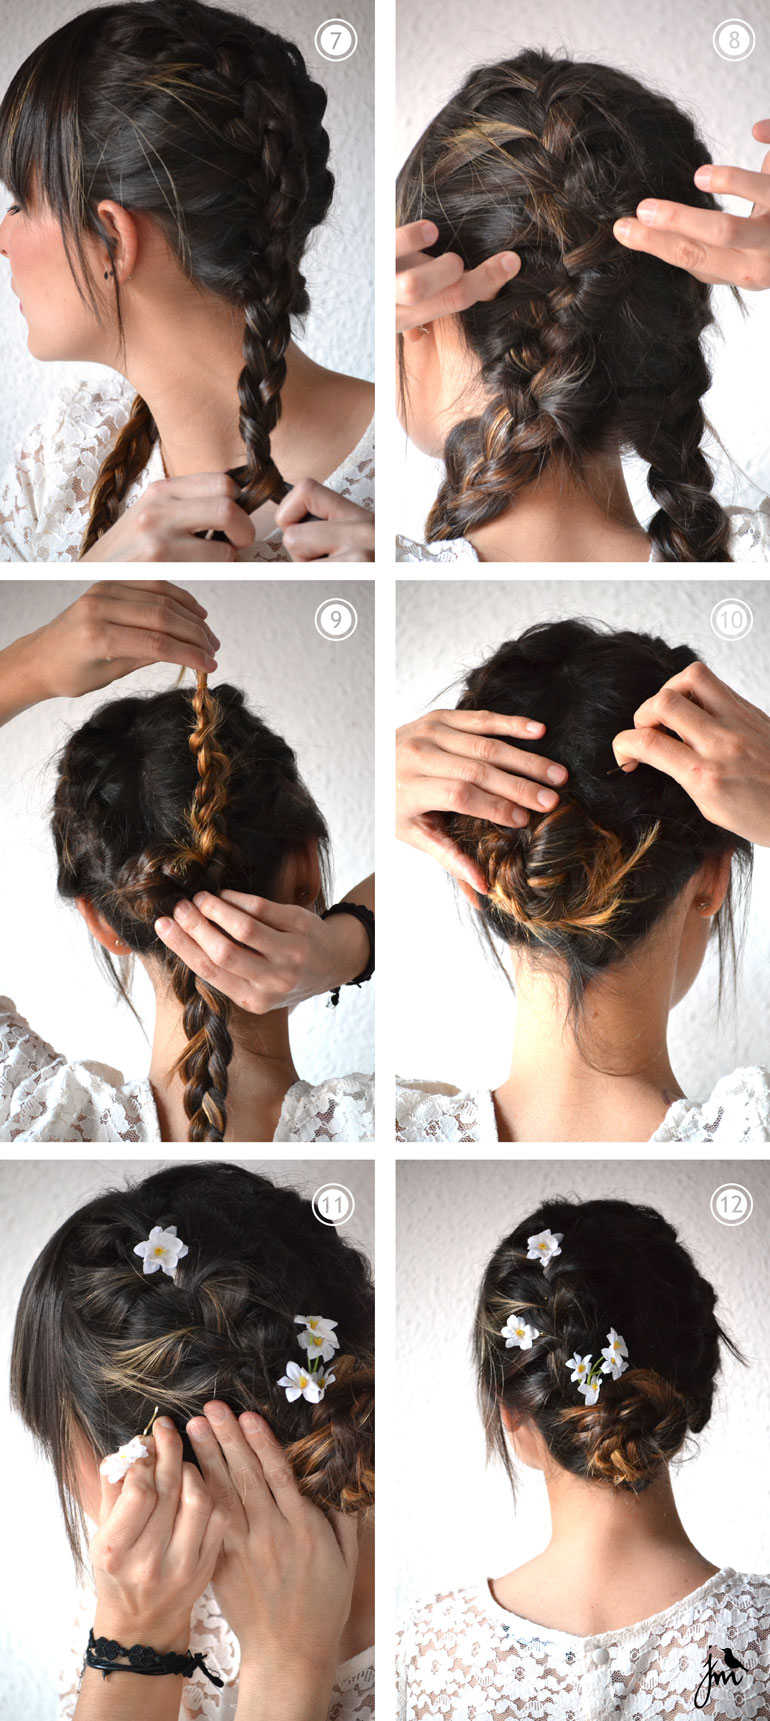 Braided Hair with Flowers